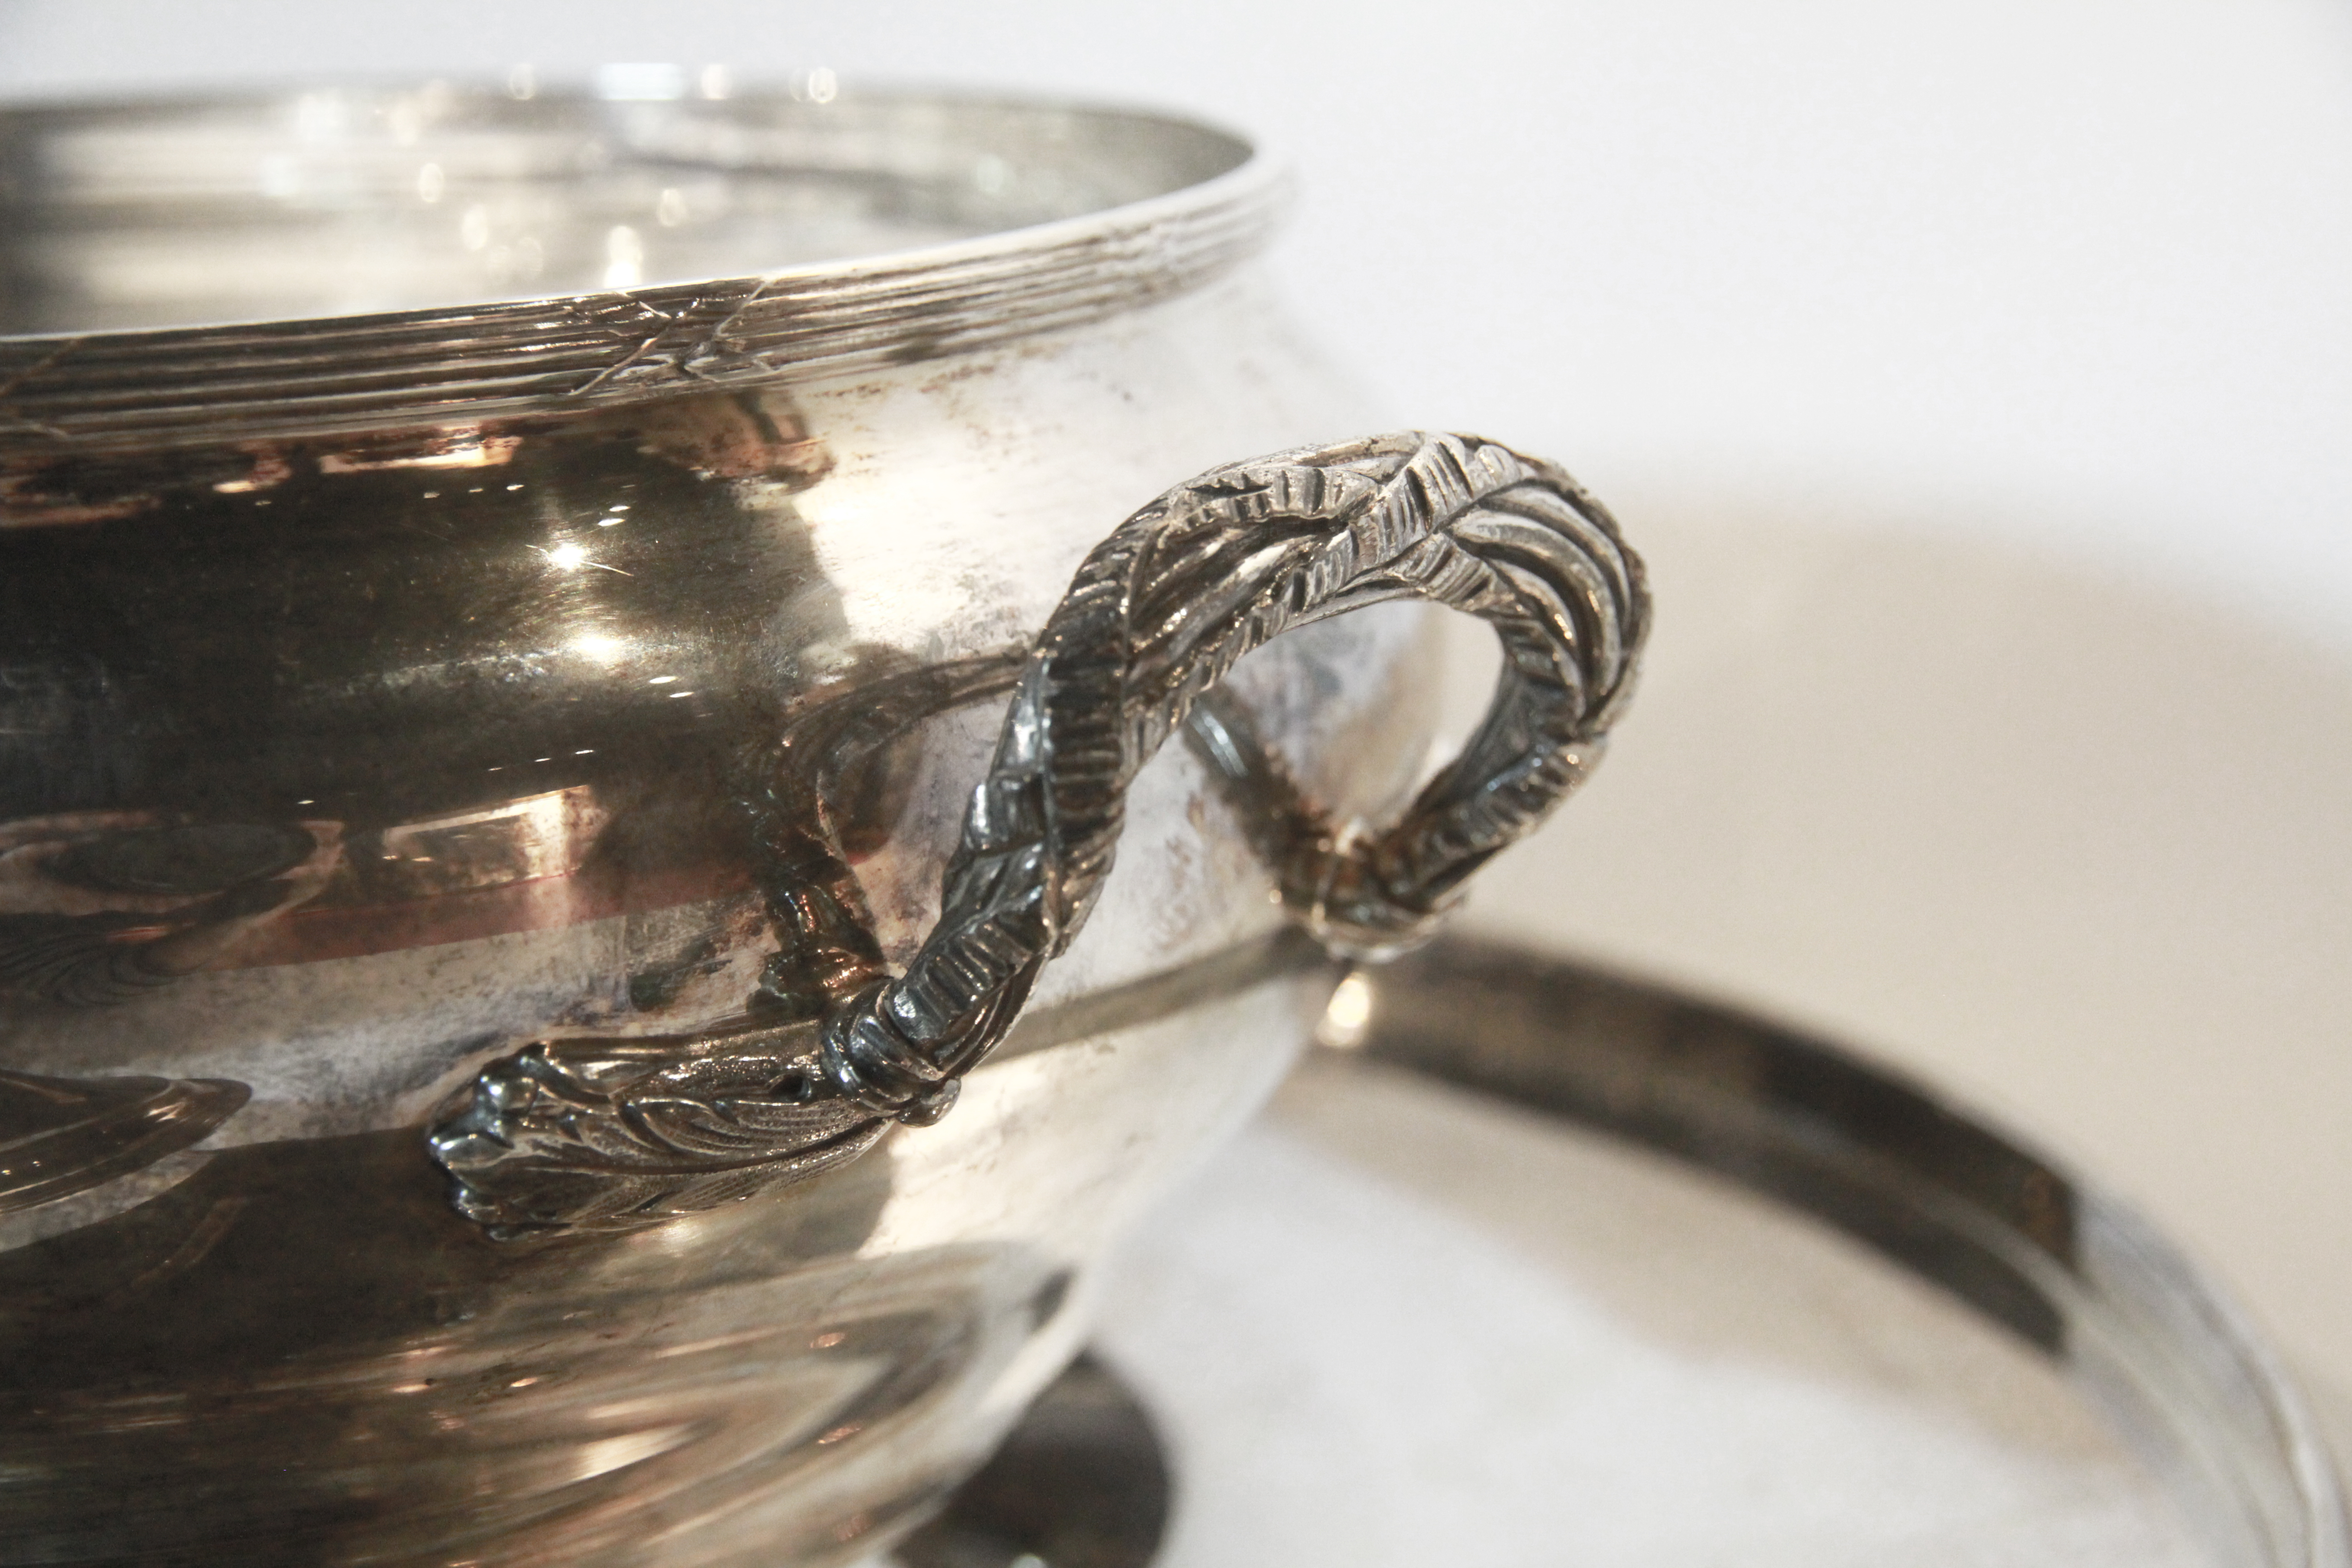 A French 19th century silver lidded tureen saucer, Paris, PROVENANCE: Property of a Gentleman - Image 4 of 5